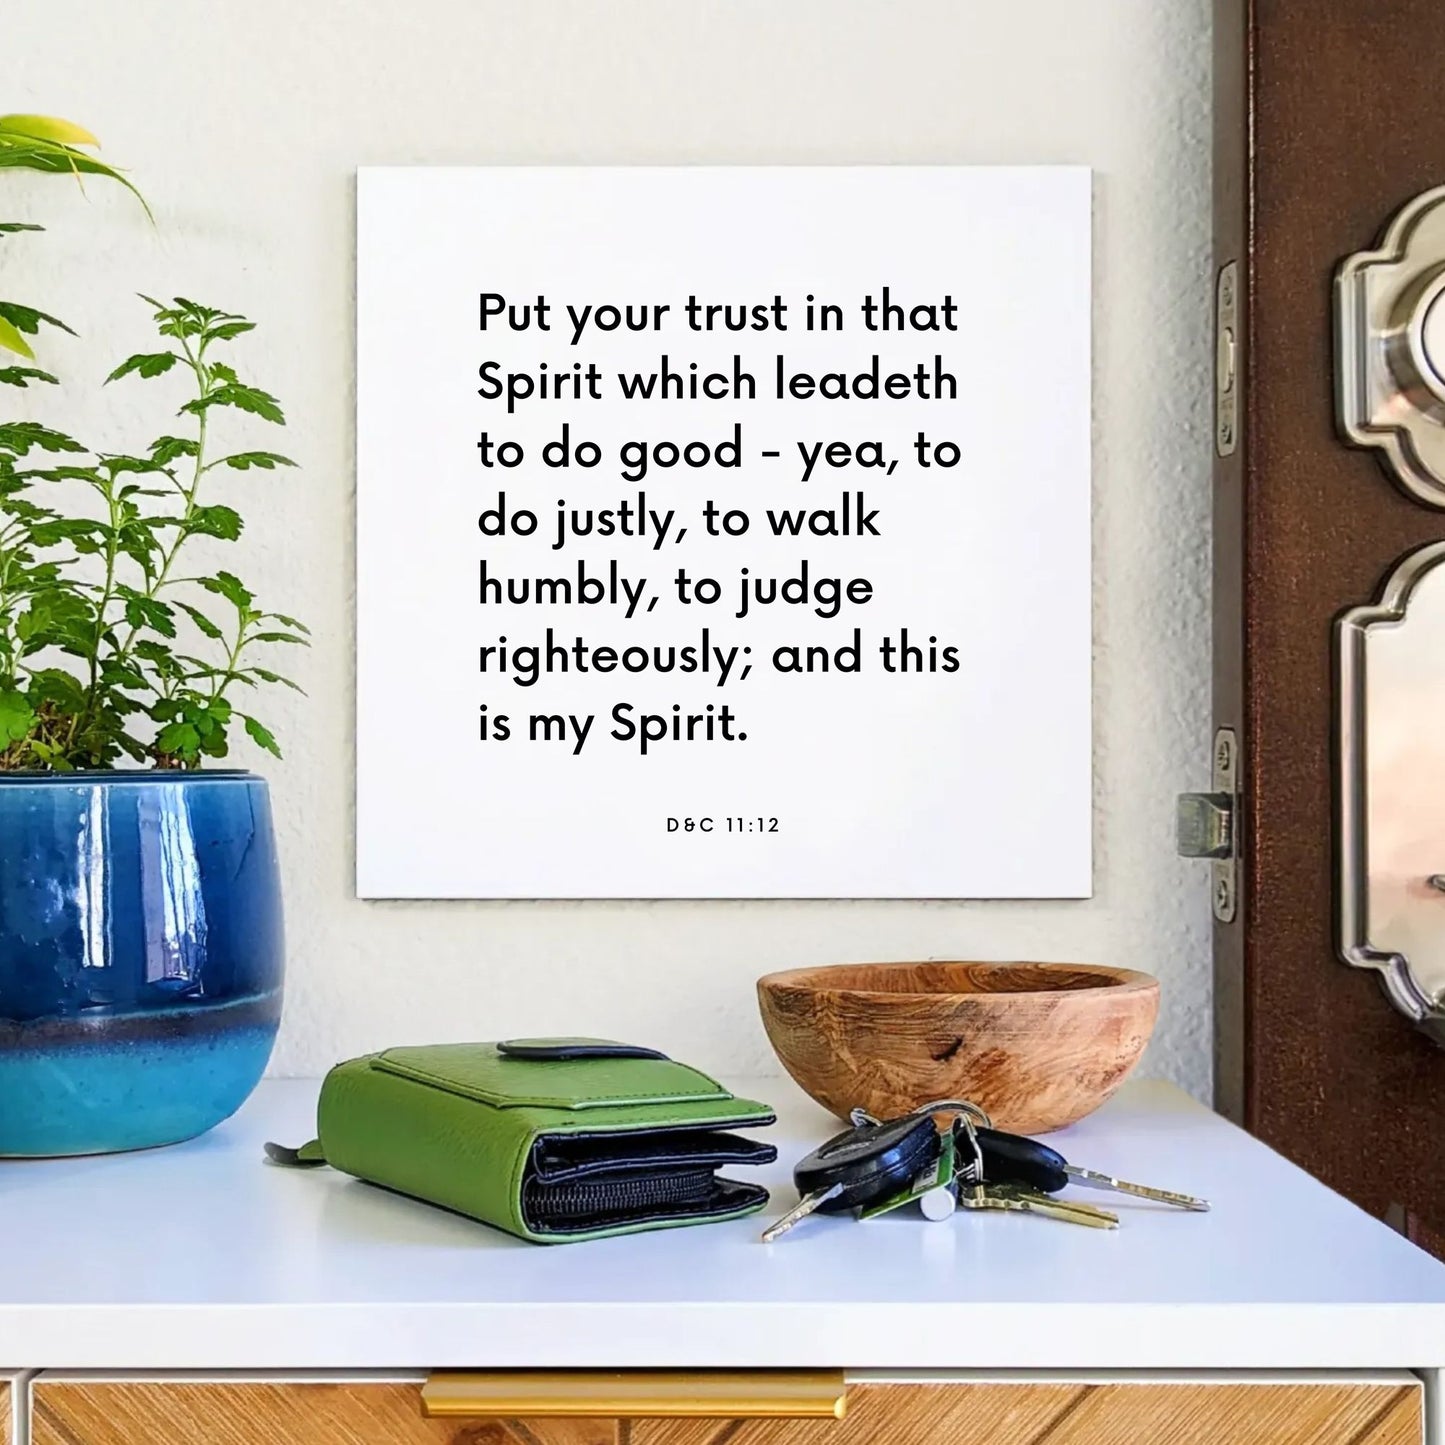 Entryway mouting of the scripture tile for D&C 11:12 - "Put your trust in that Spirit which leadeth to do good"